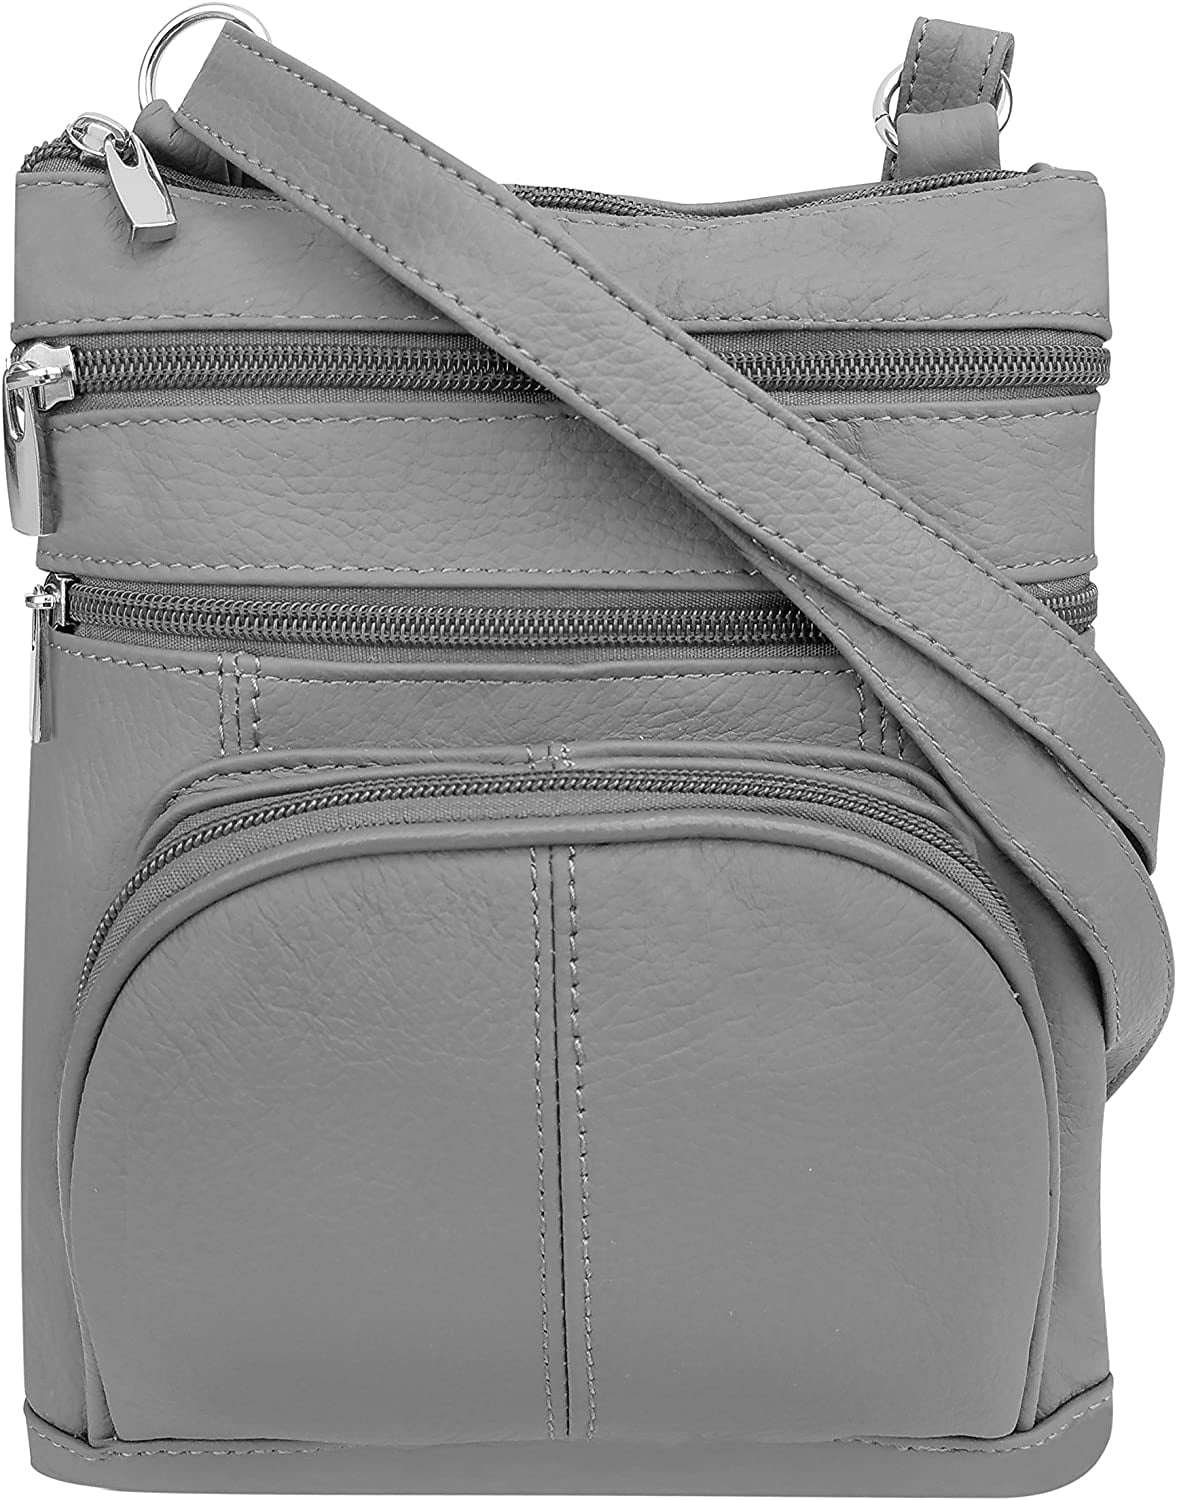 Buy Lampostick Crossbody Purse for Women, Faux Leather Tassel Shoulder Bag  for Girls with 2 Removable Straps at Amazon.in